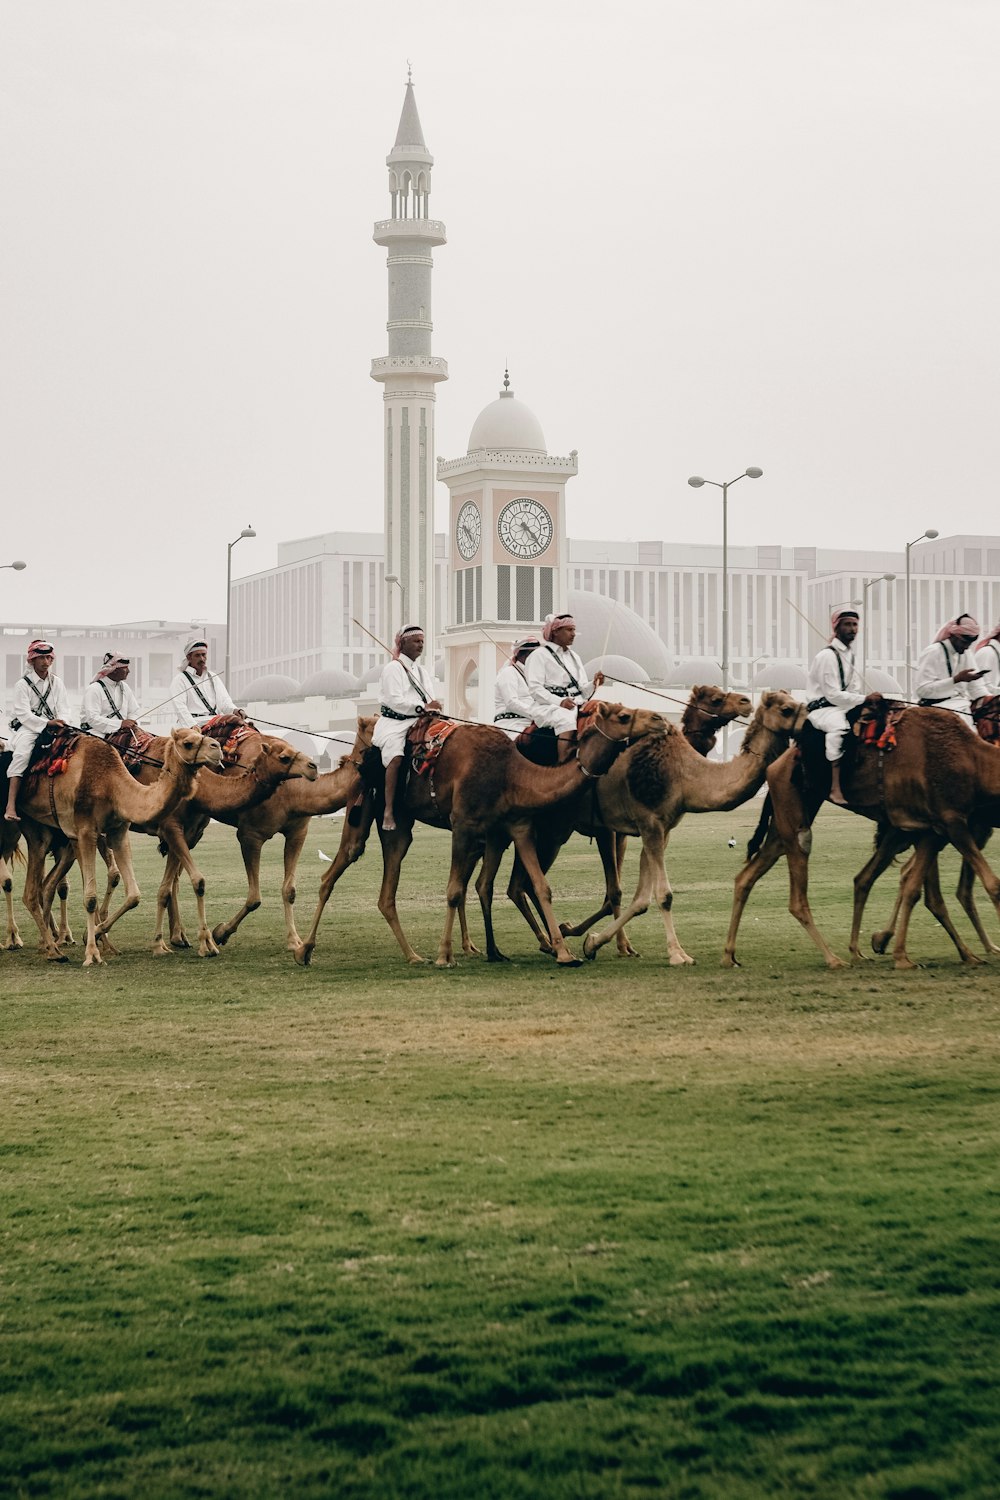 a group of men riding on the backs of camels